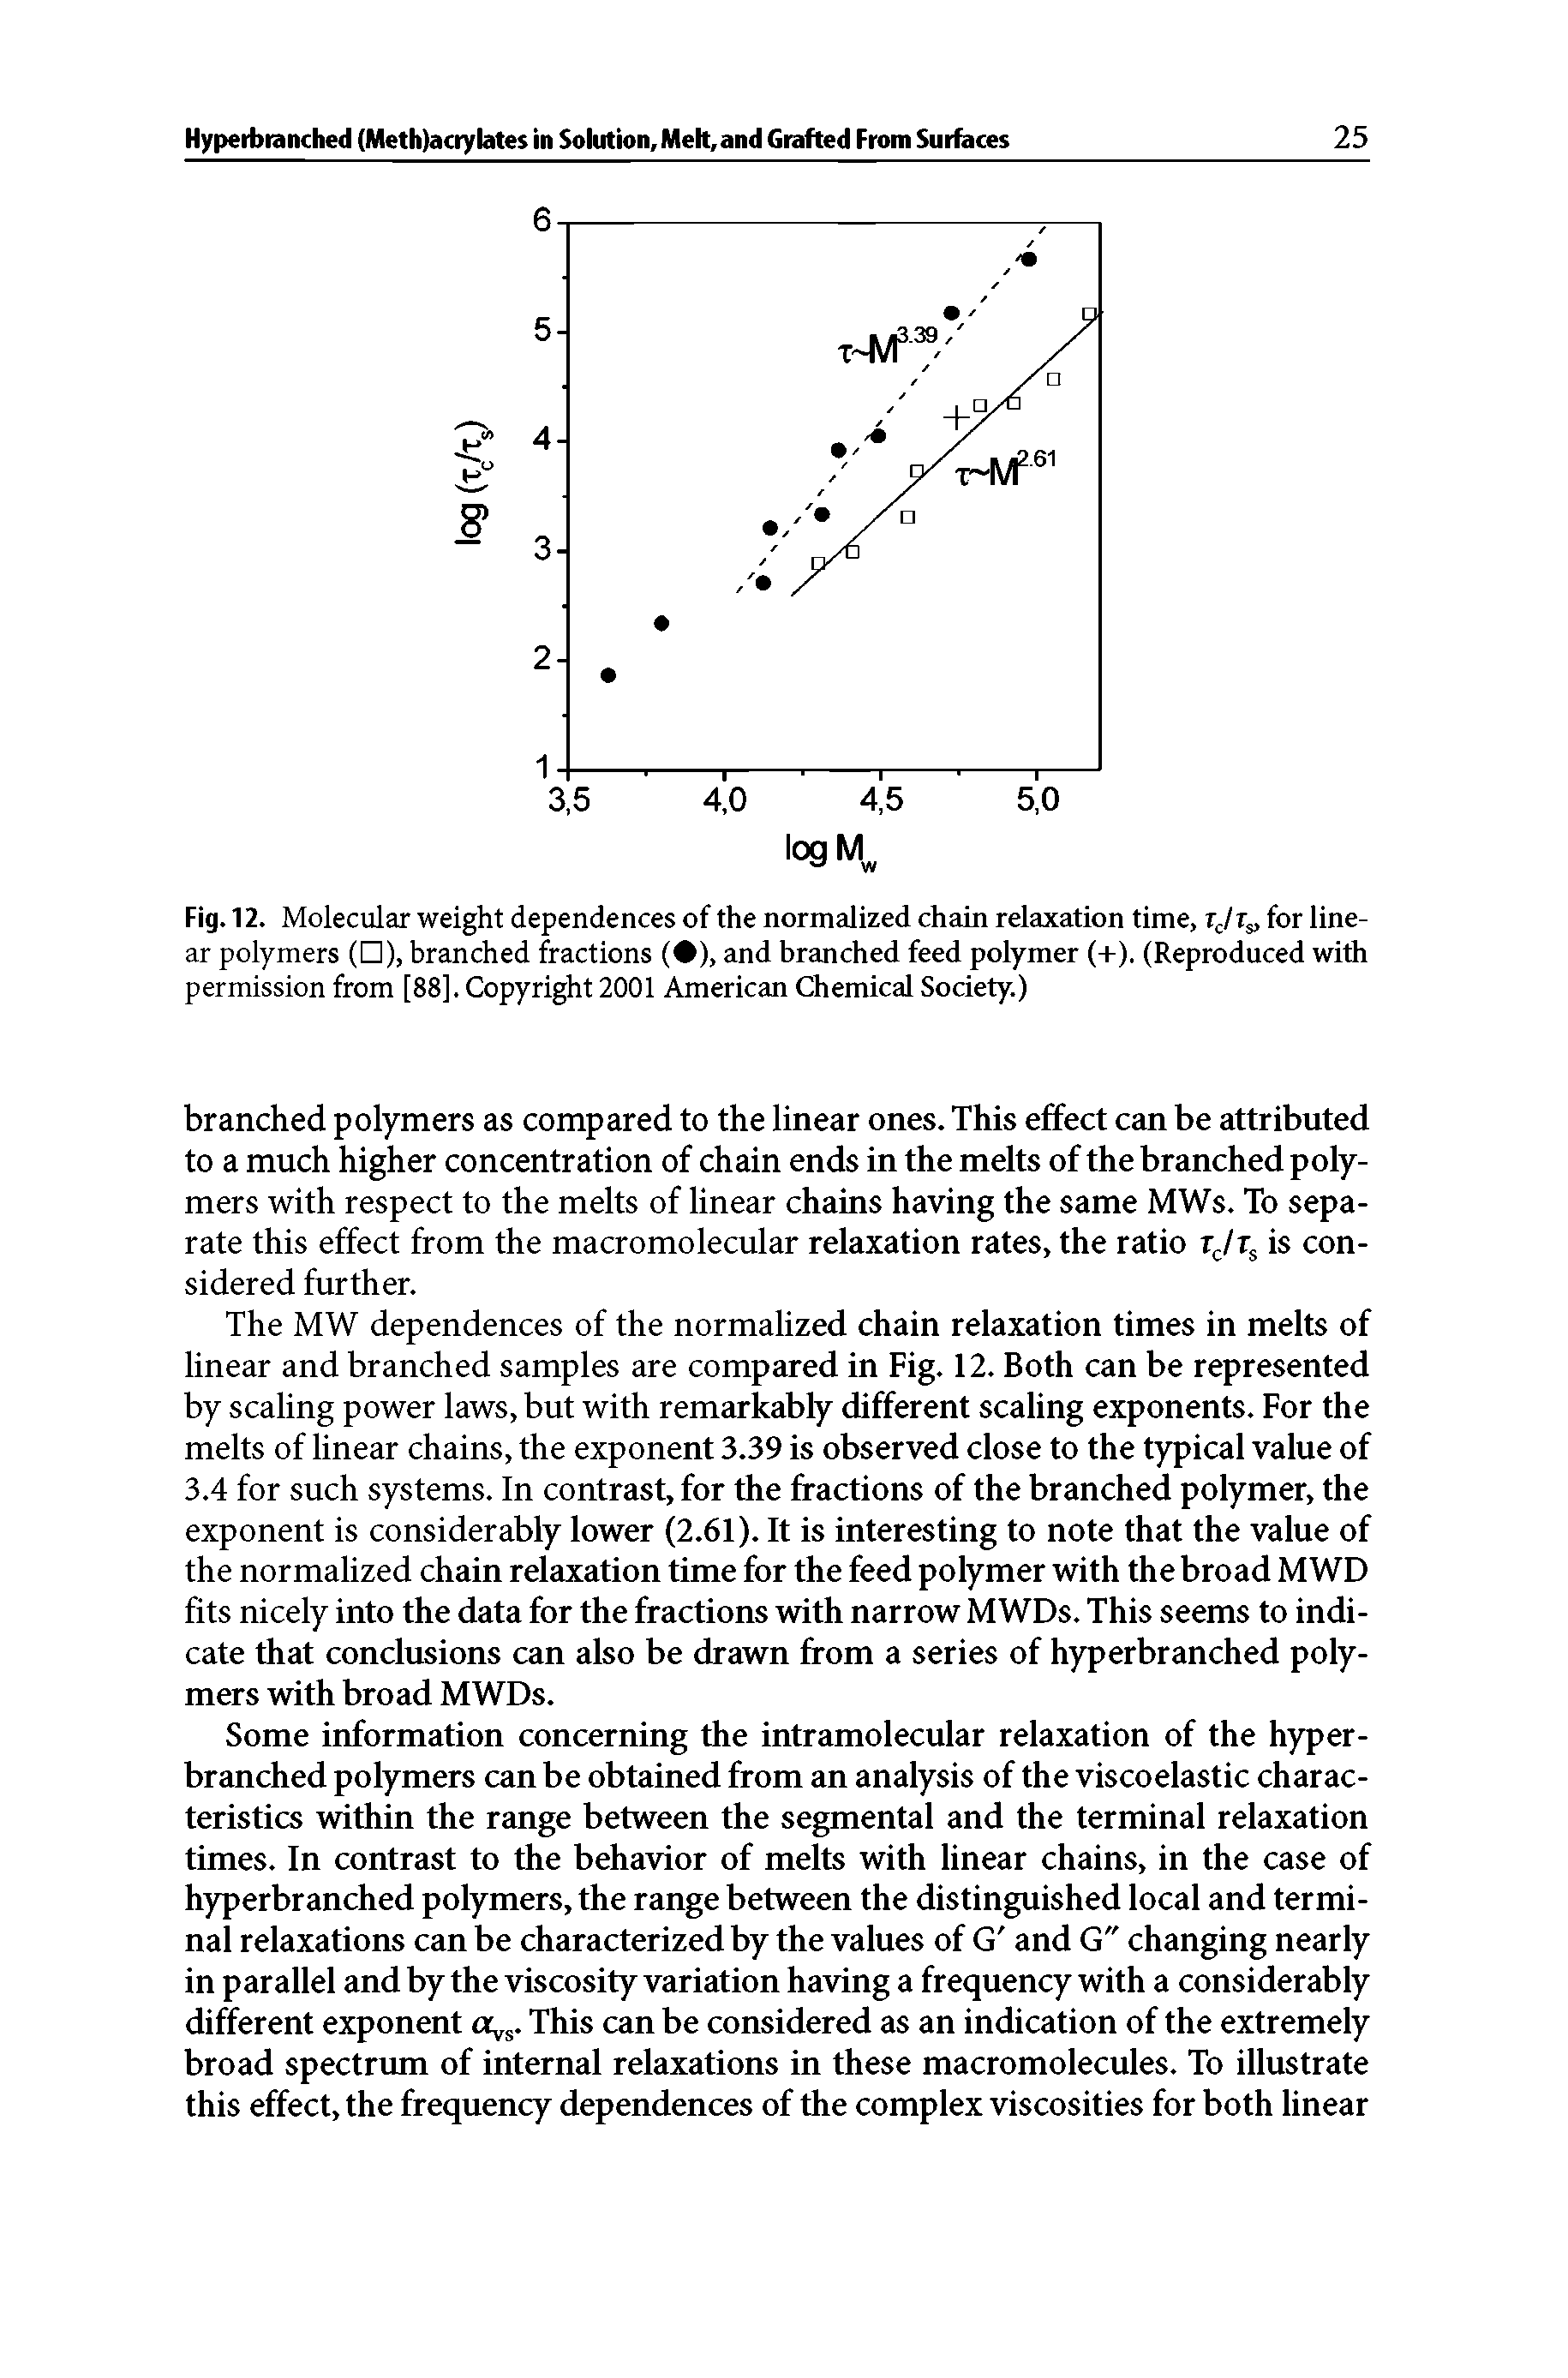 Fig. 12. Molecular weight dependences of the normalized chain relaxation time, tJTs, for linear polymers ( ), branched fractions ( ), and branched feed polymer (+). (Reproduced with permission from [88]. Copyright 2001 American Chemical Society.)...